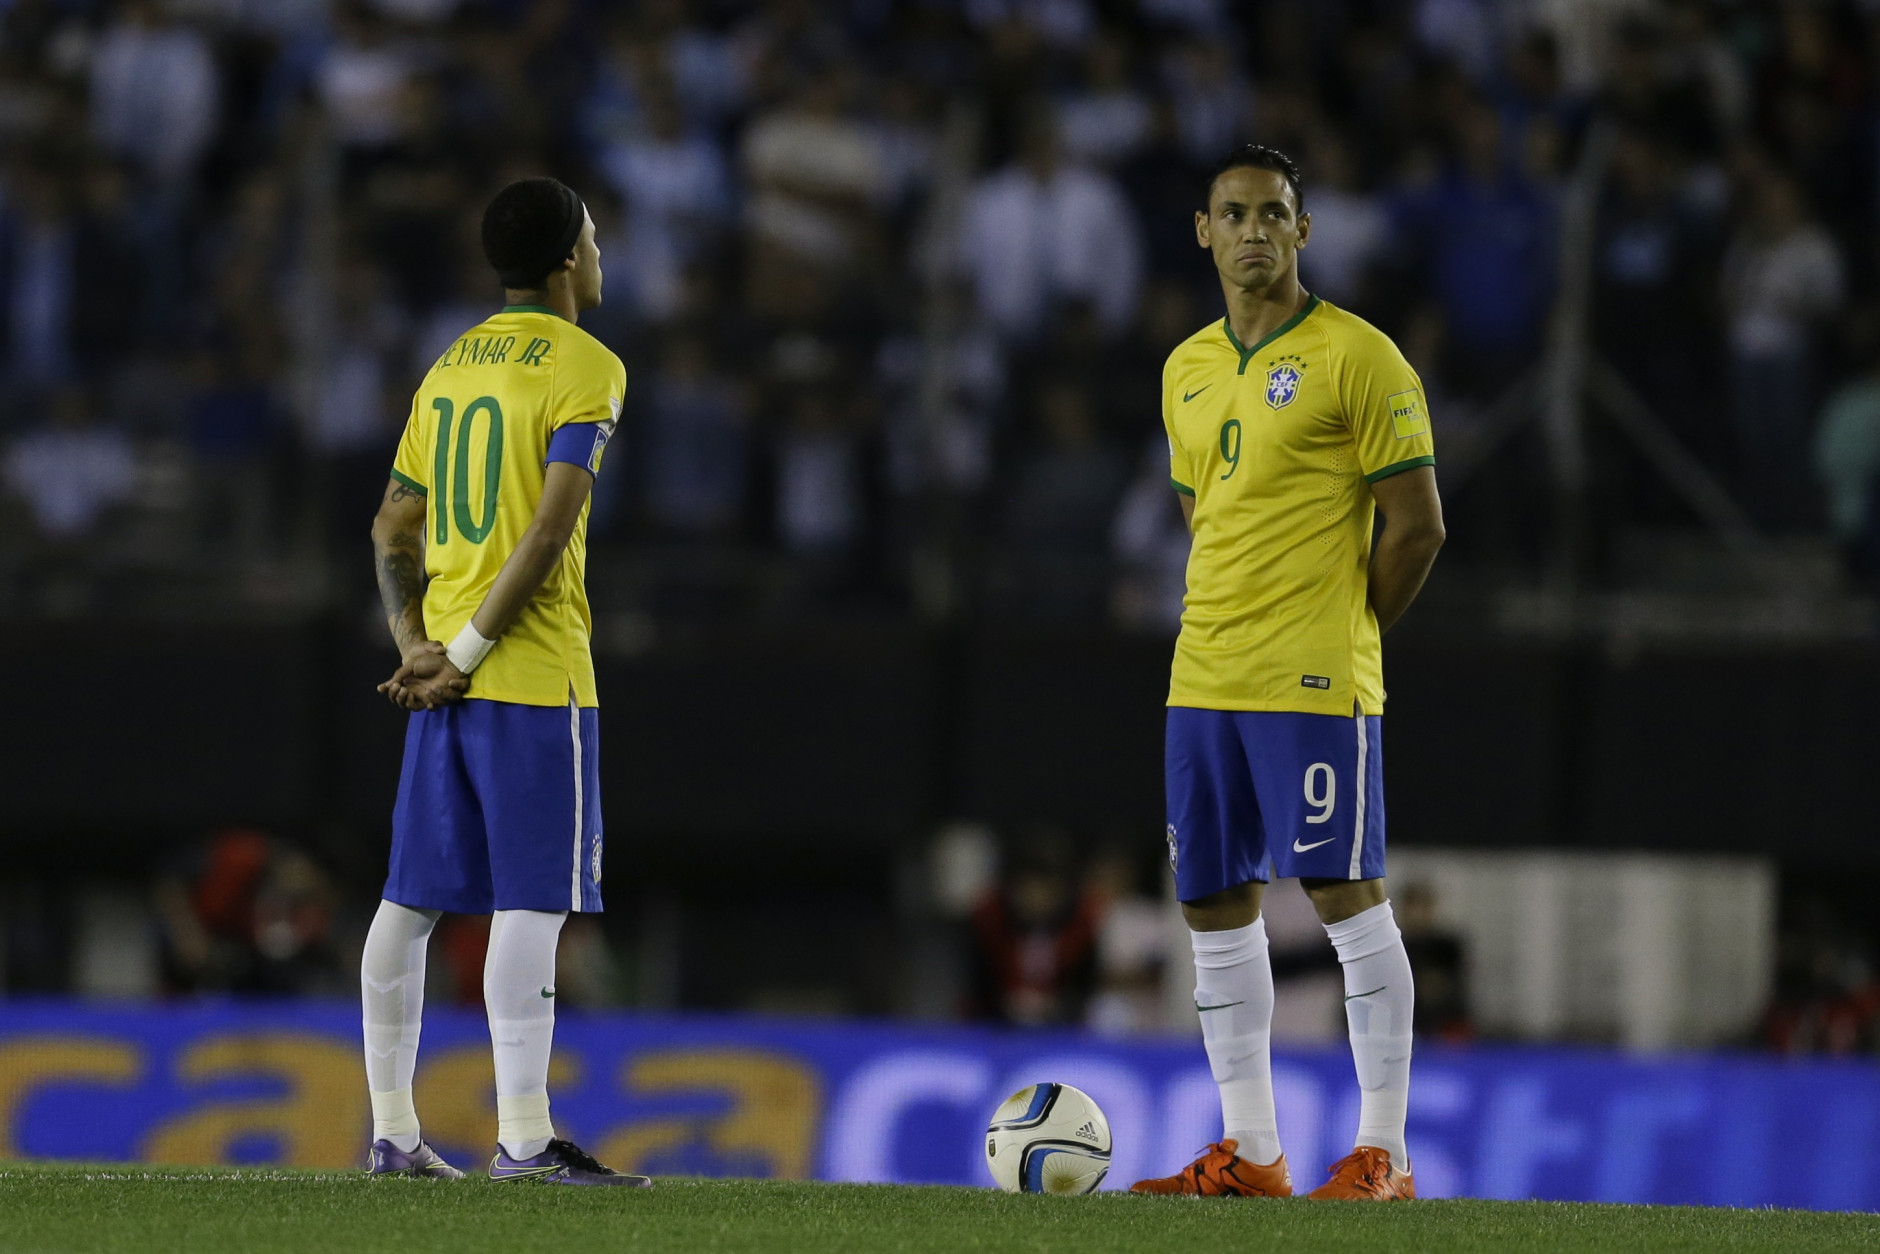 Brazil's Neymar, left, and Ricardo Oliveira observe a minutes of silence to pay their respects to the victims of attack that took place in Paris prior to a 2018 World Cup qualifying soccer match in Buenos Aires, Argentina, Friday, Nov. 13, 2015. Several dozen people were killed in attacks around Paris on Friday, French President Francois Hollande said, announcing that he was closing the countrys borders and declaring a state of emergency. (AP Photo/Victor R. Caivano)